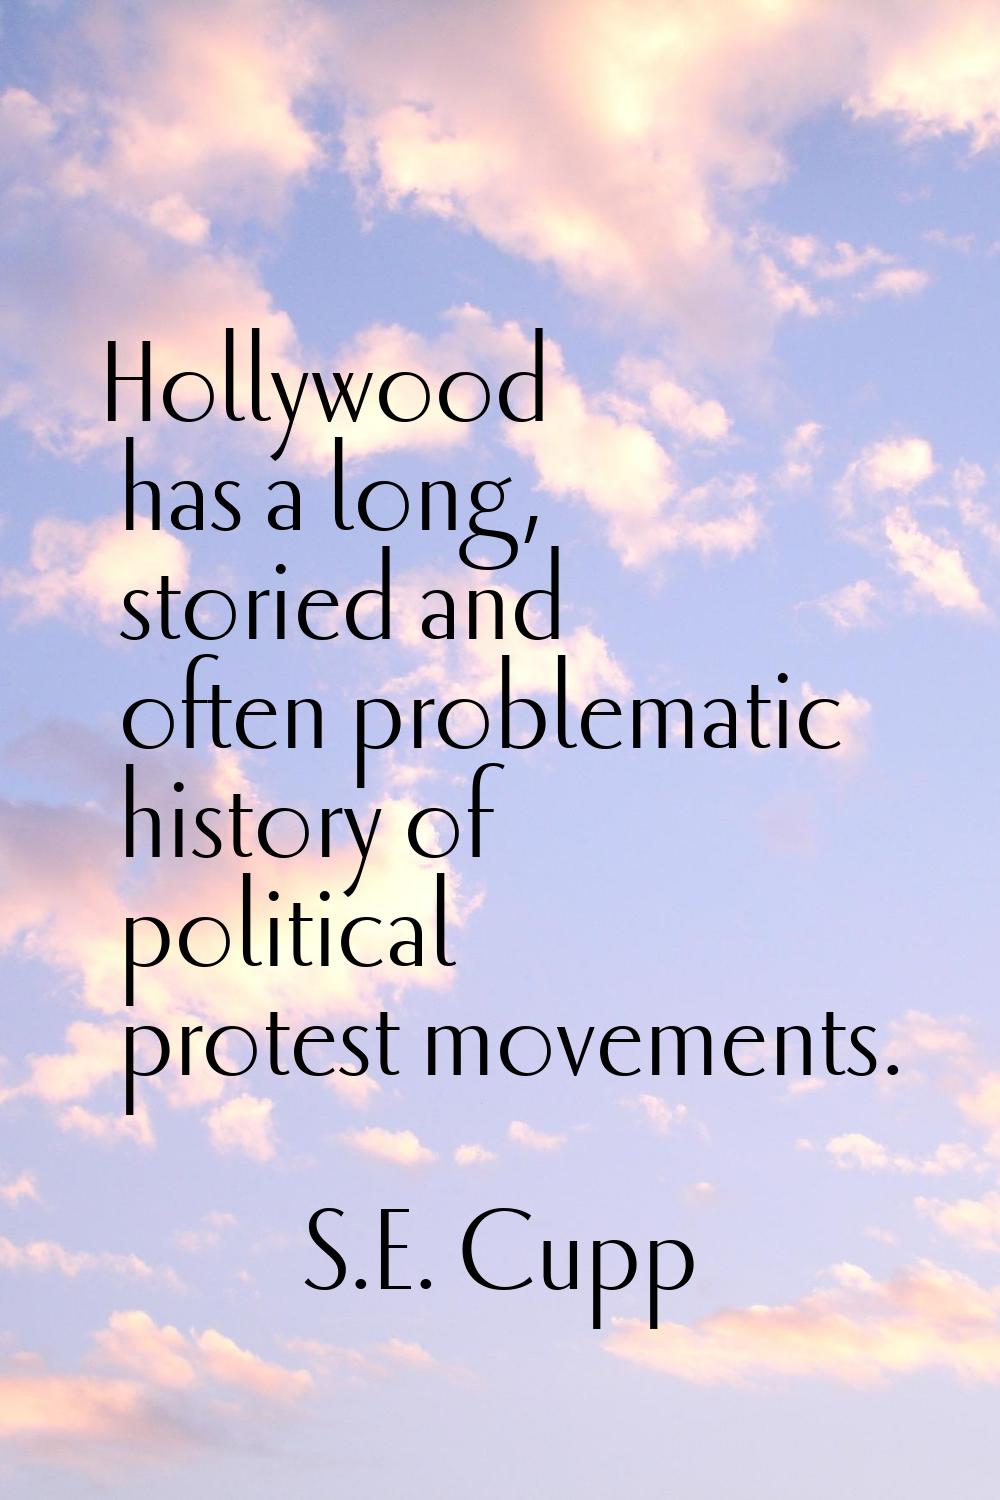 Hollywood has a long, storied and often problematic history of political protest movements.